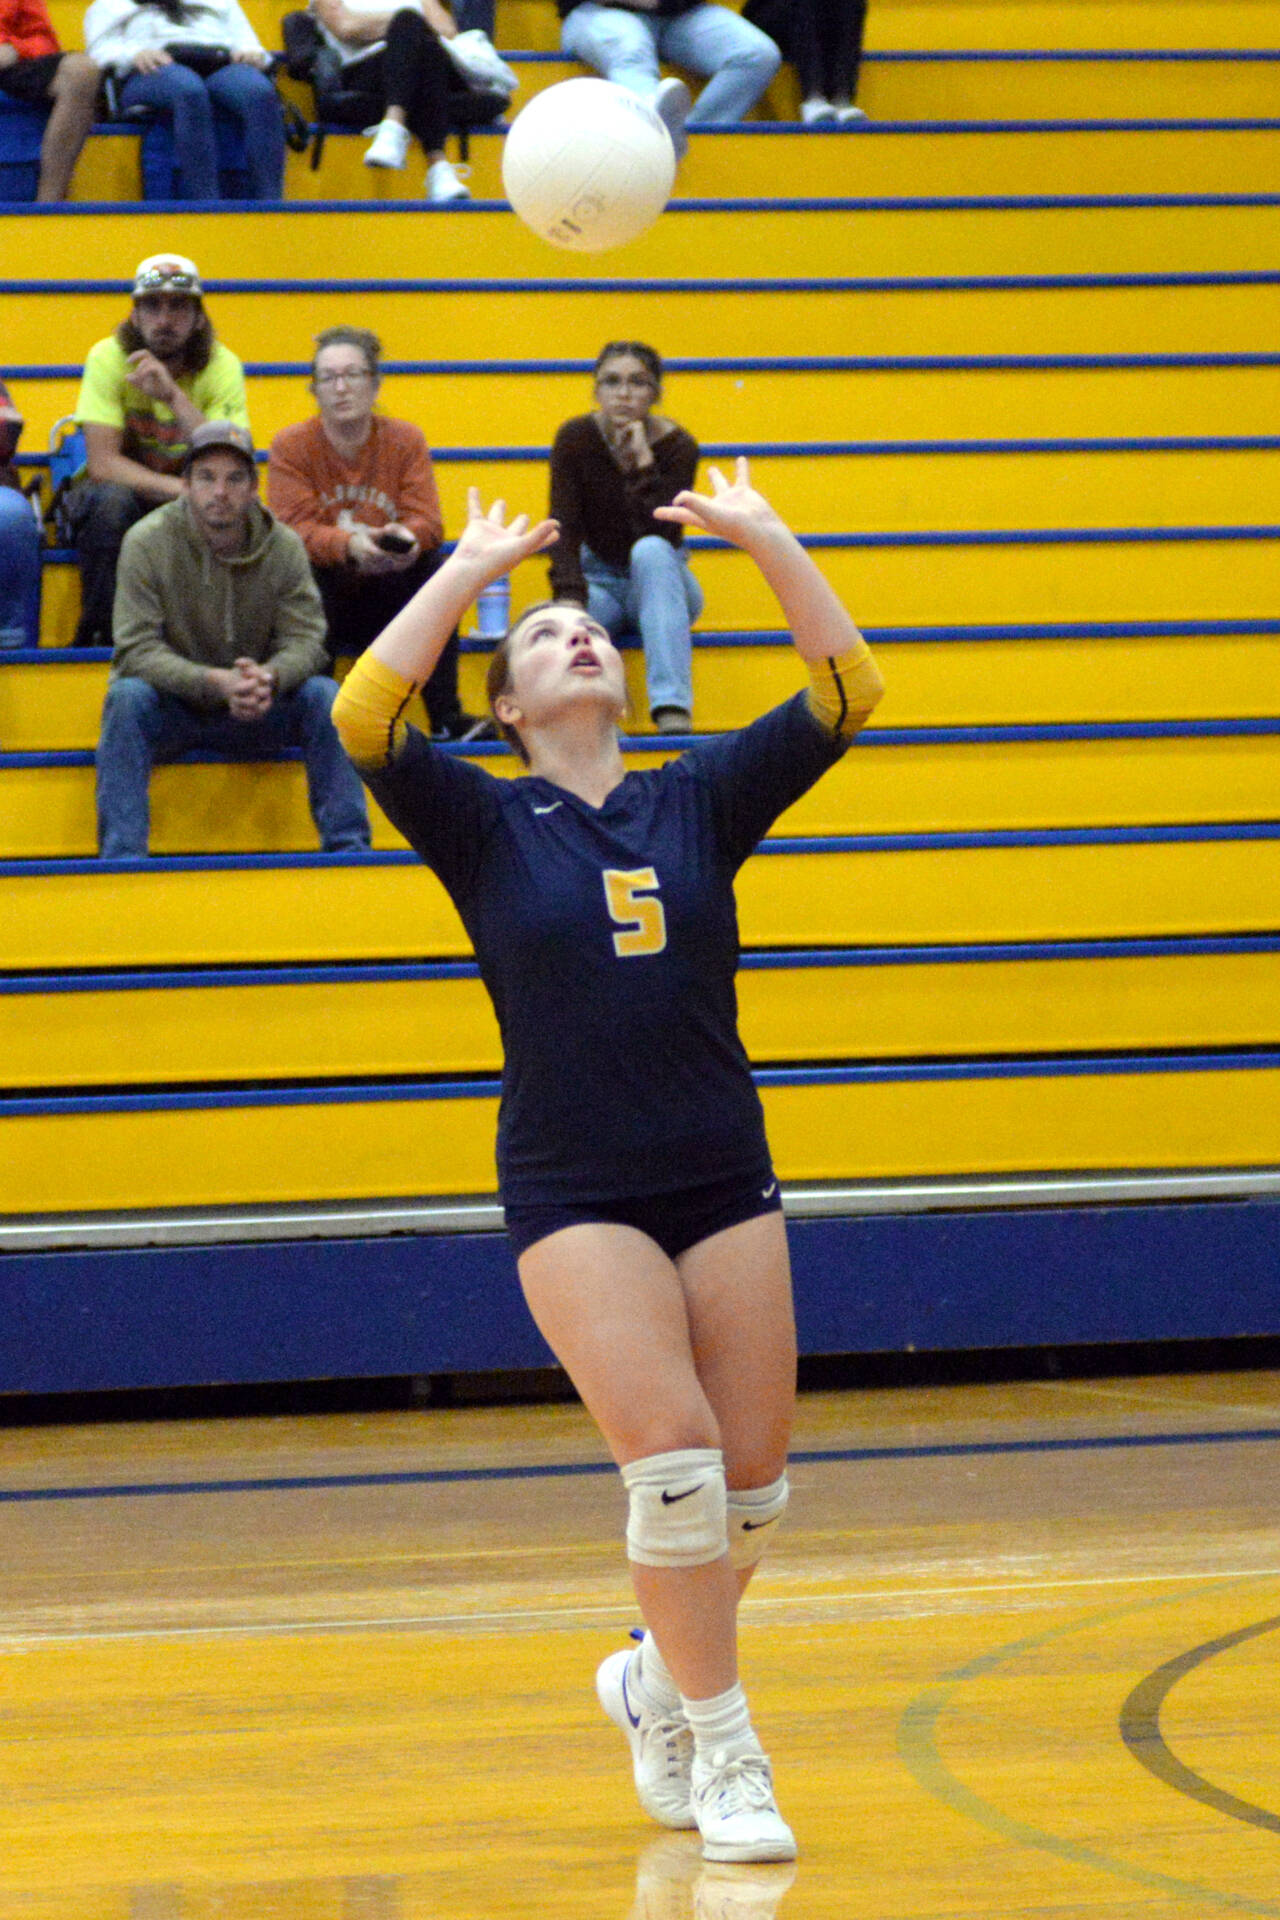 DAILY WORLD FILE PHOTO Aberdeen senior setter Cameryn Micheau, seen here in a file photo, had 30 assists in a straight-set victory over W. F. West on Thursday in Chehalis.